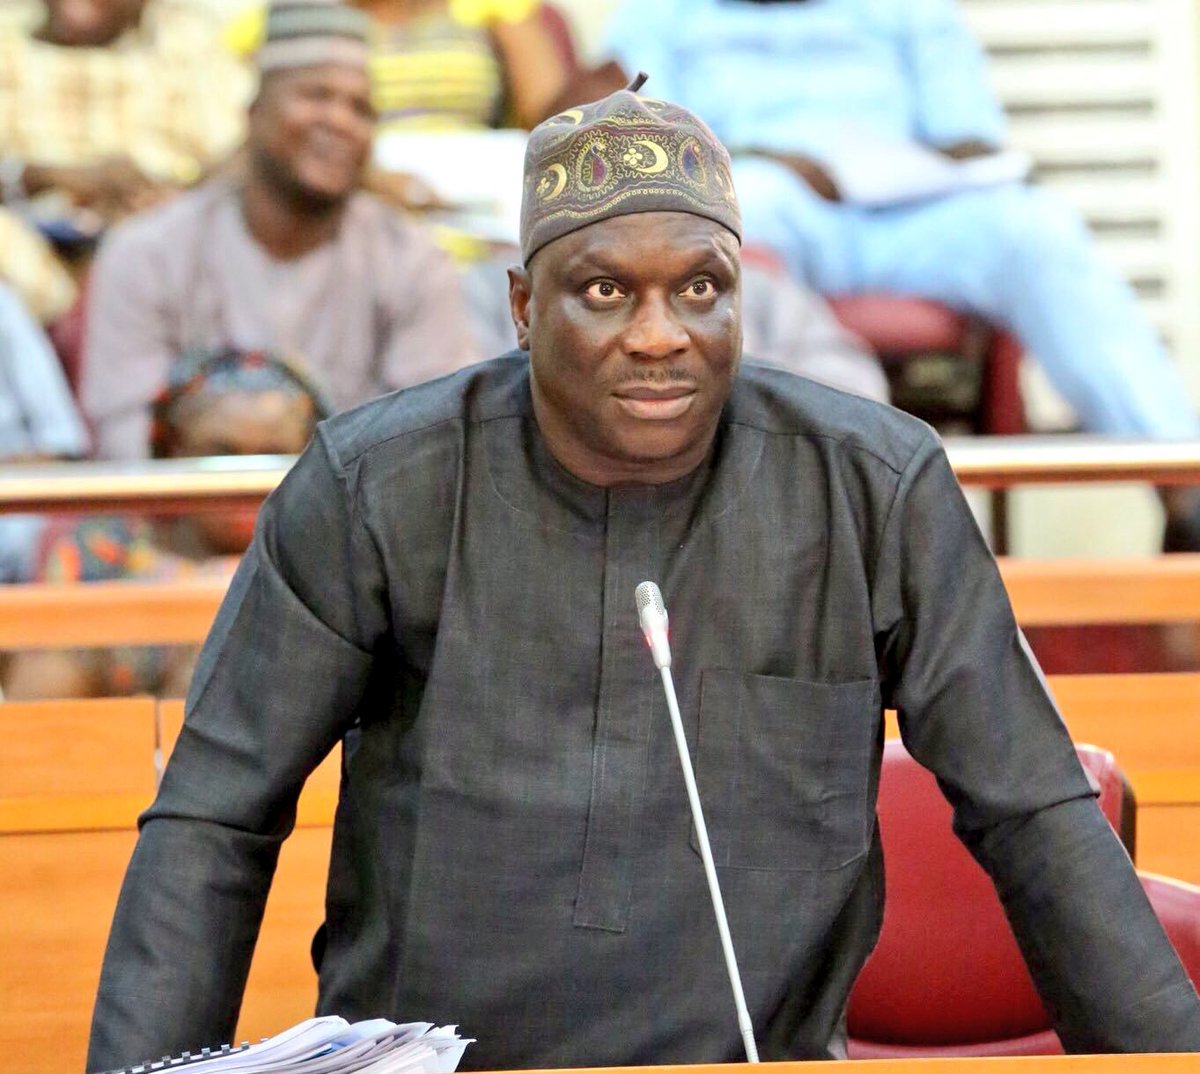 Lagos house of assembly loses member - TheCable